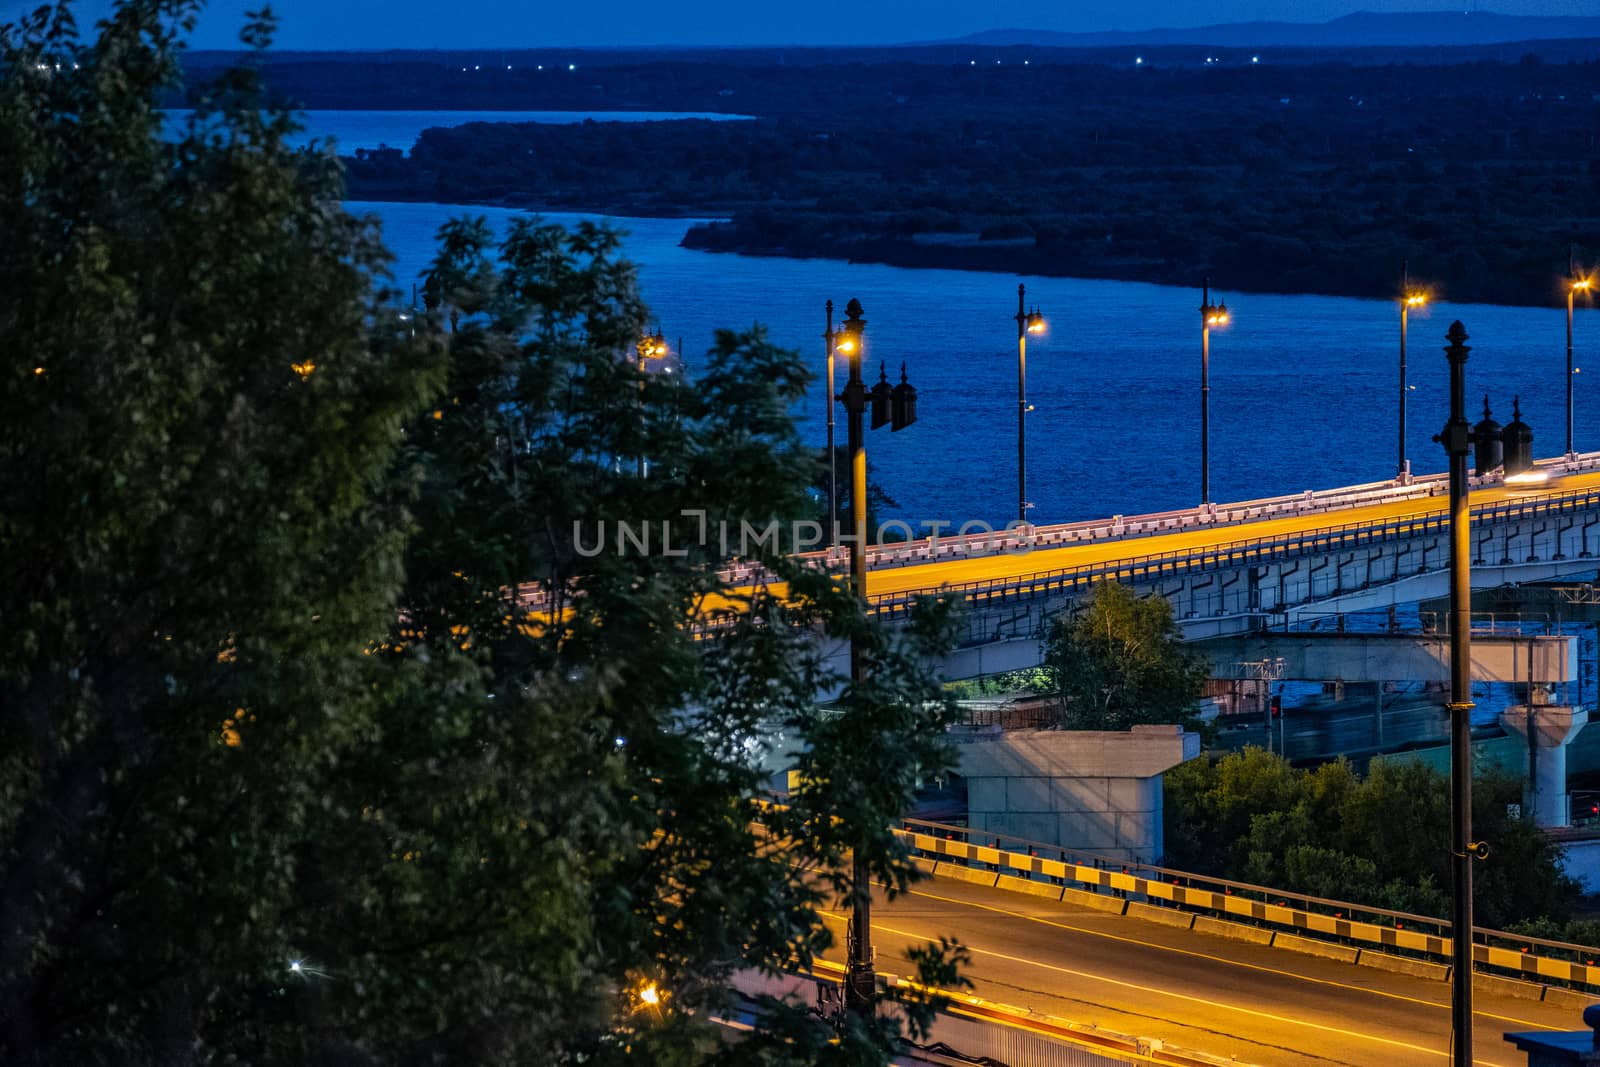 Bridge over the Amur river in Khabarovsk, Russia. Night photography. by rdv27